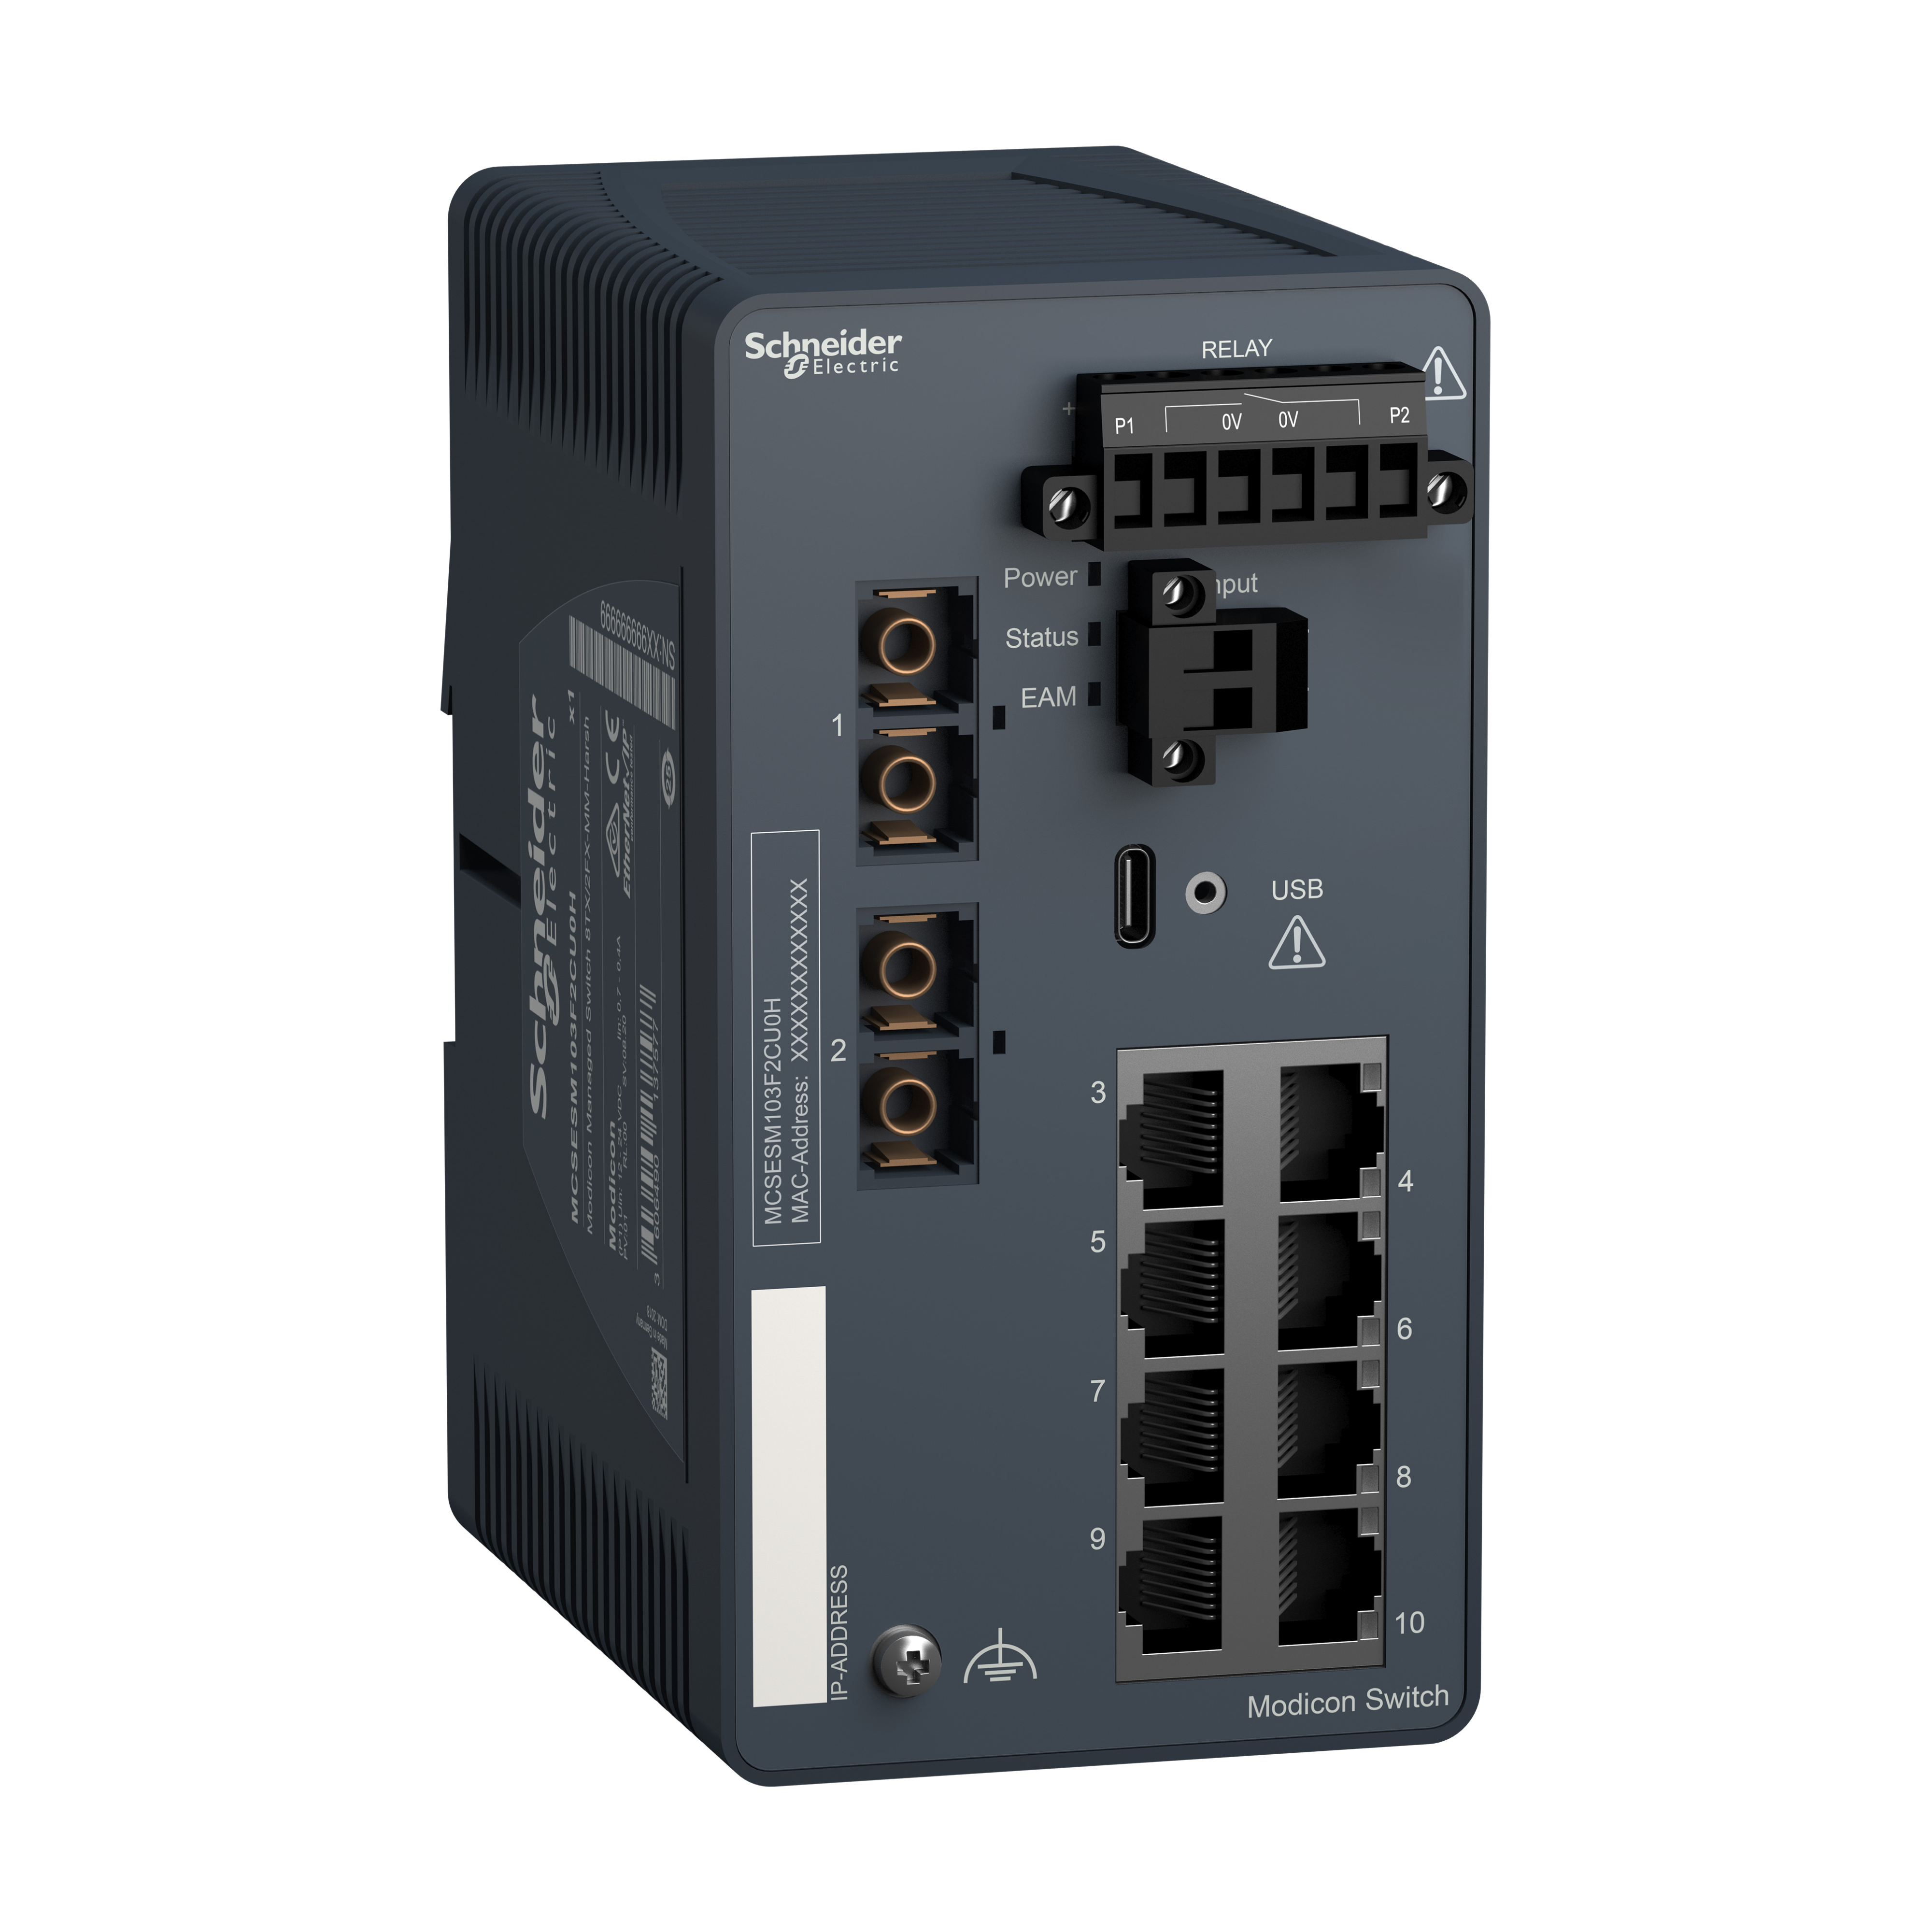 Modicon Managed Switch - 8 ports for copper + 2 ports for fiber optic multimode - Harsh